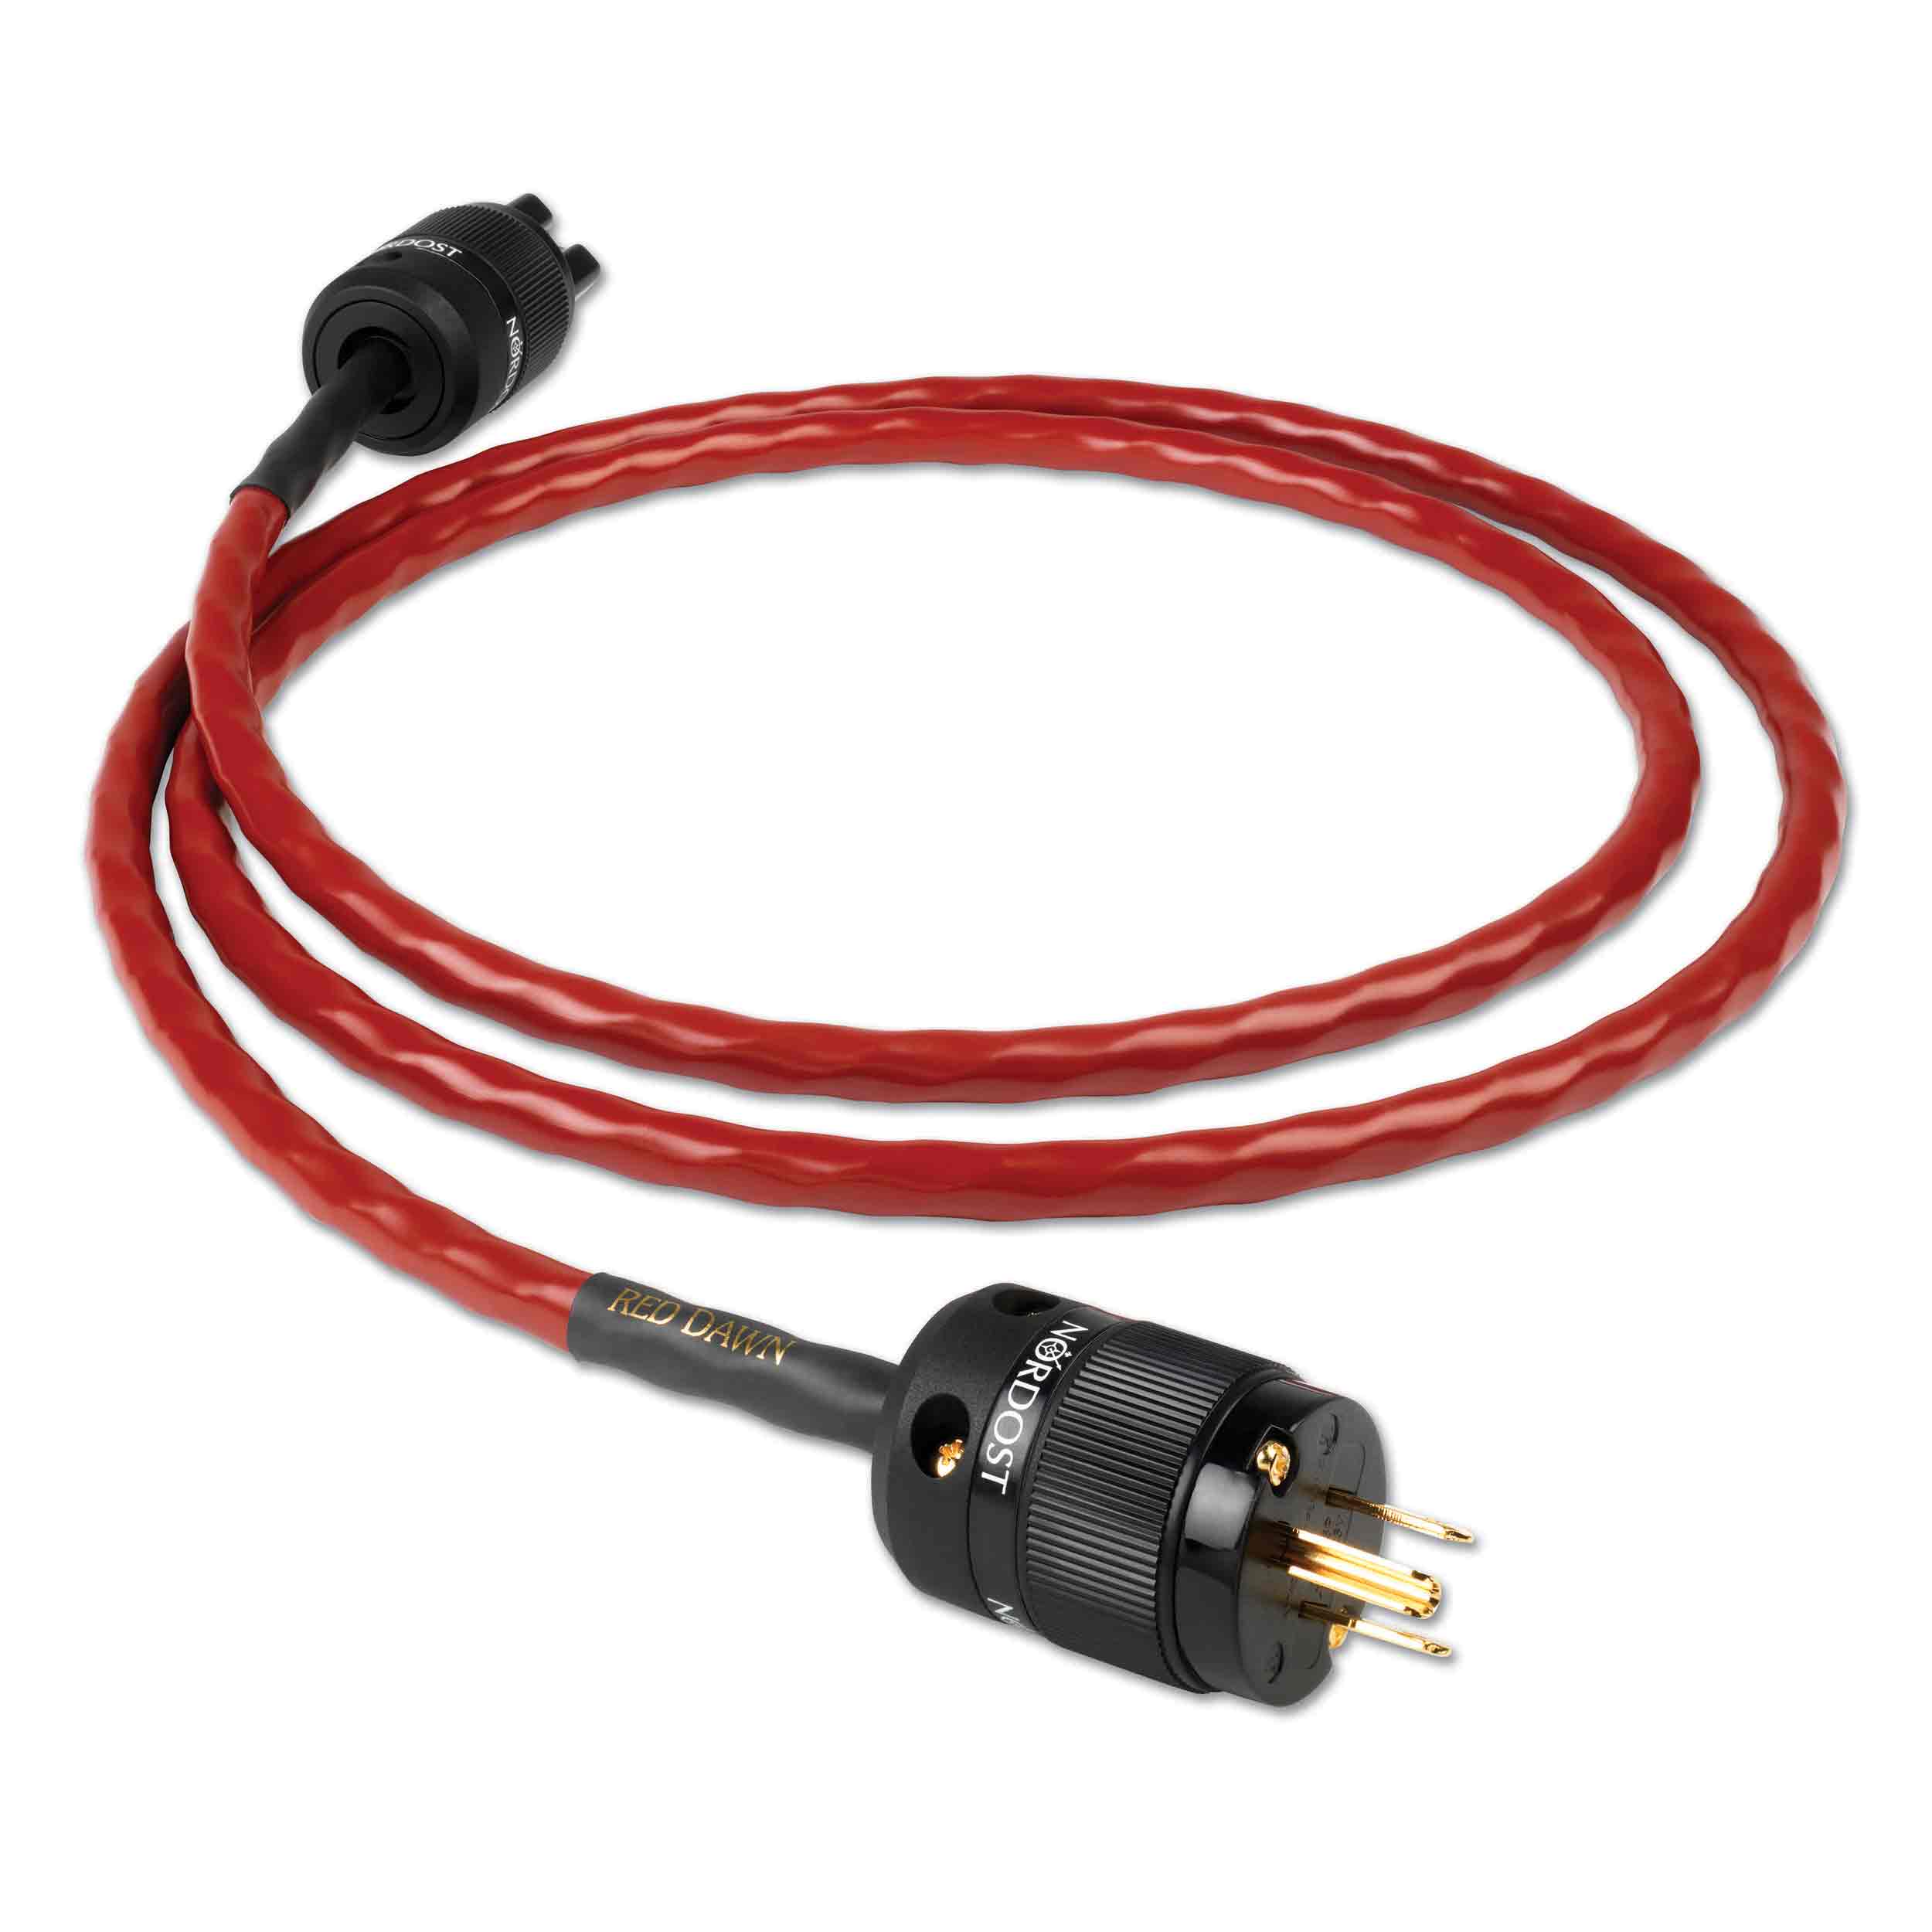 Nordost Red Dawn Power Cord - Sold as a Single